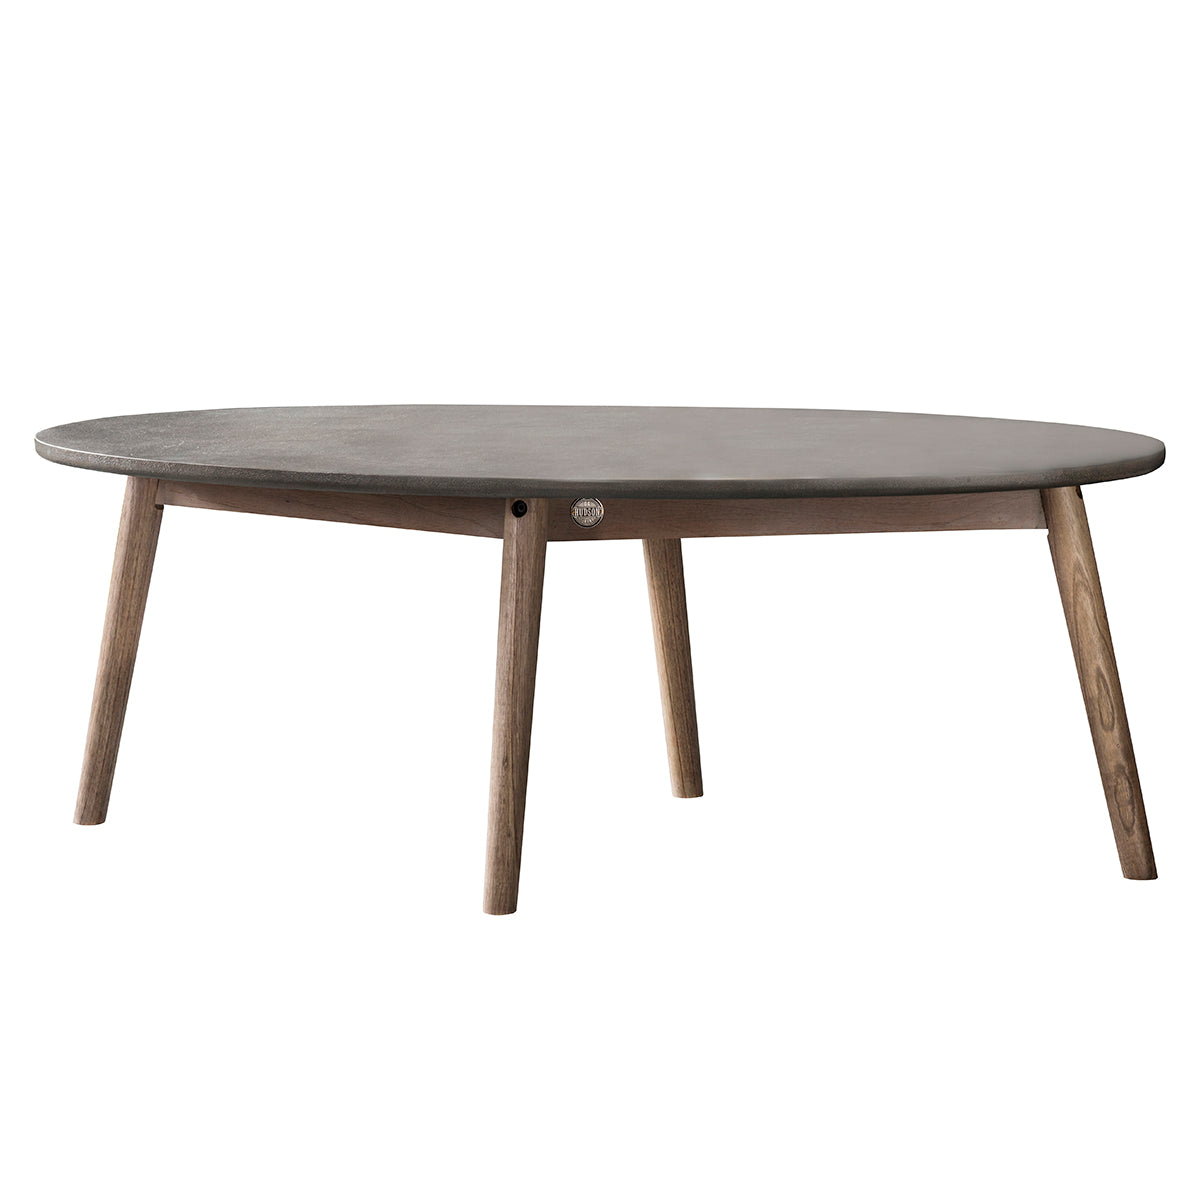 A Challaborough Oval Coffee Table 1100x600x400mm with wooden legs and a grey concrete top for interior decor from Kikiathome.co.uk.